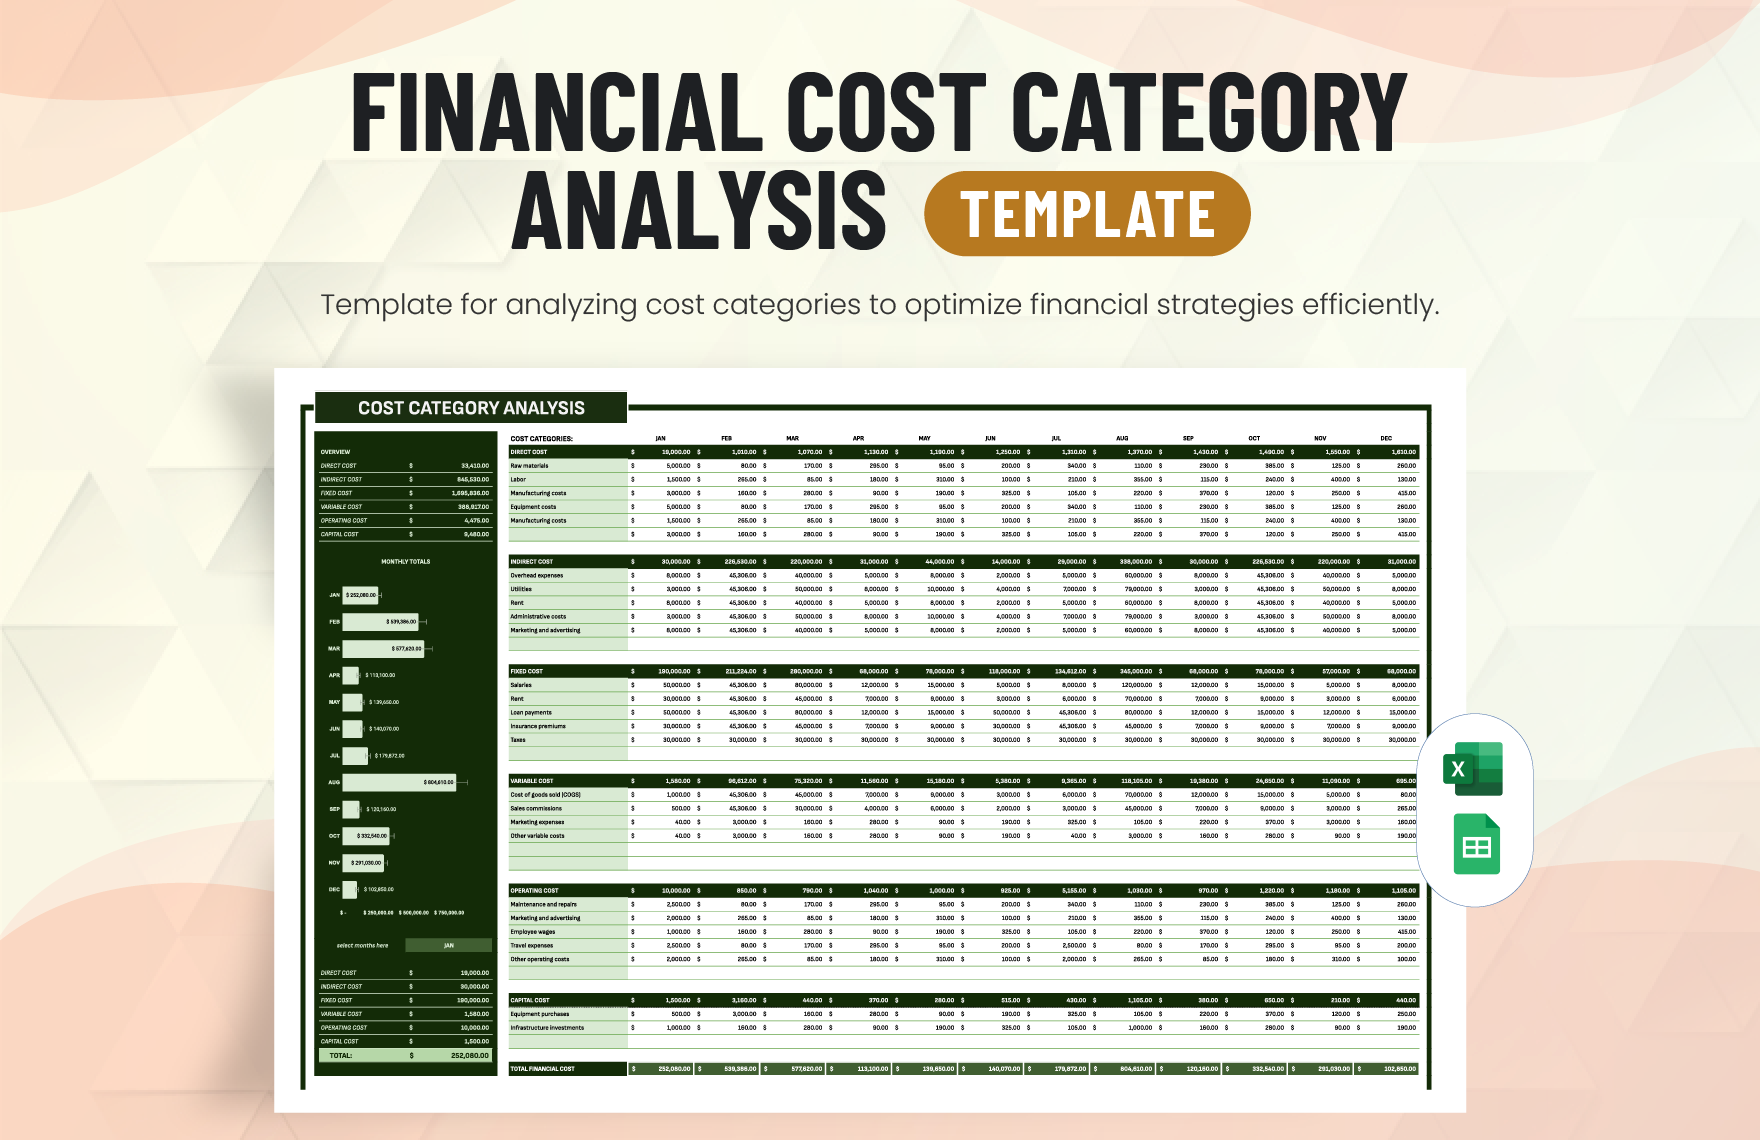 Financial Cost Category Analysis Template